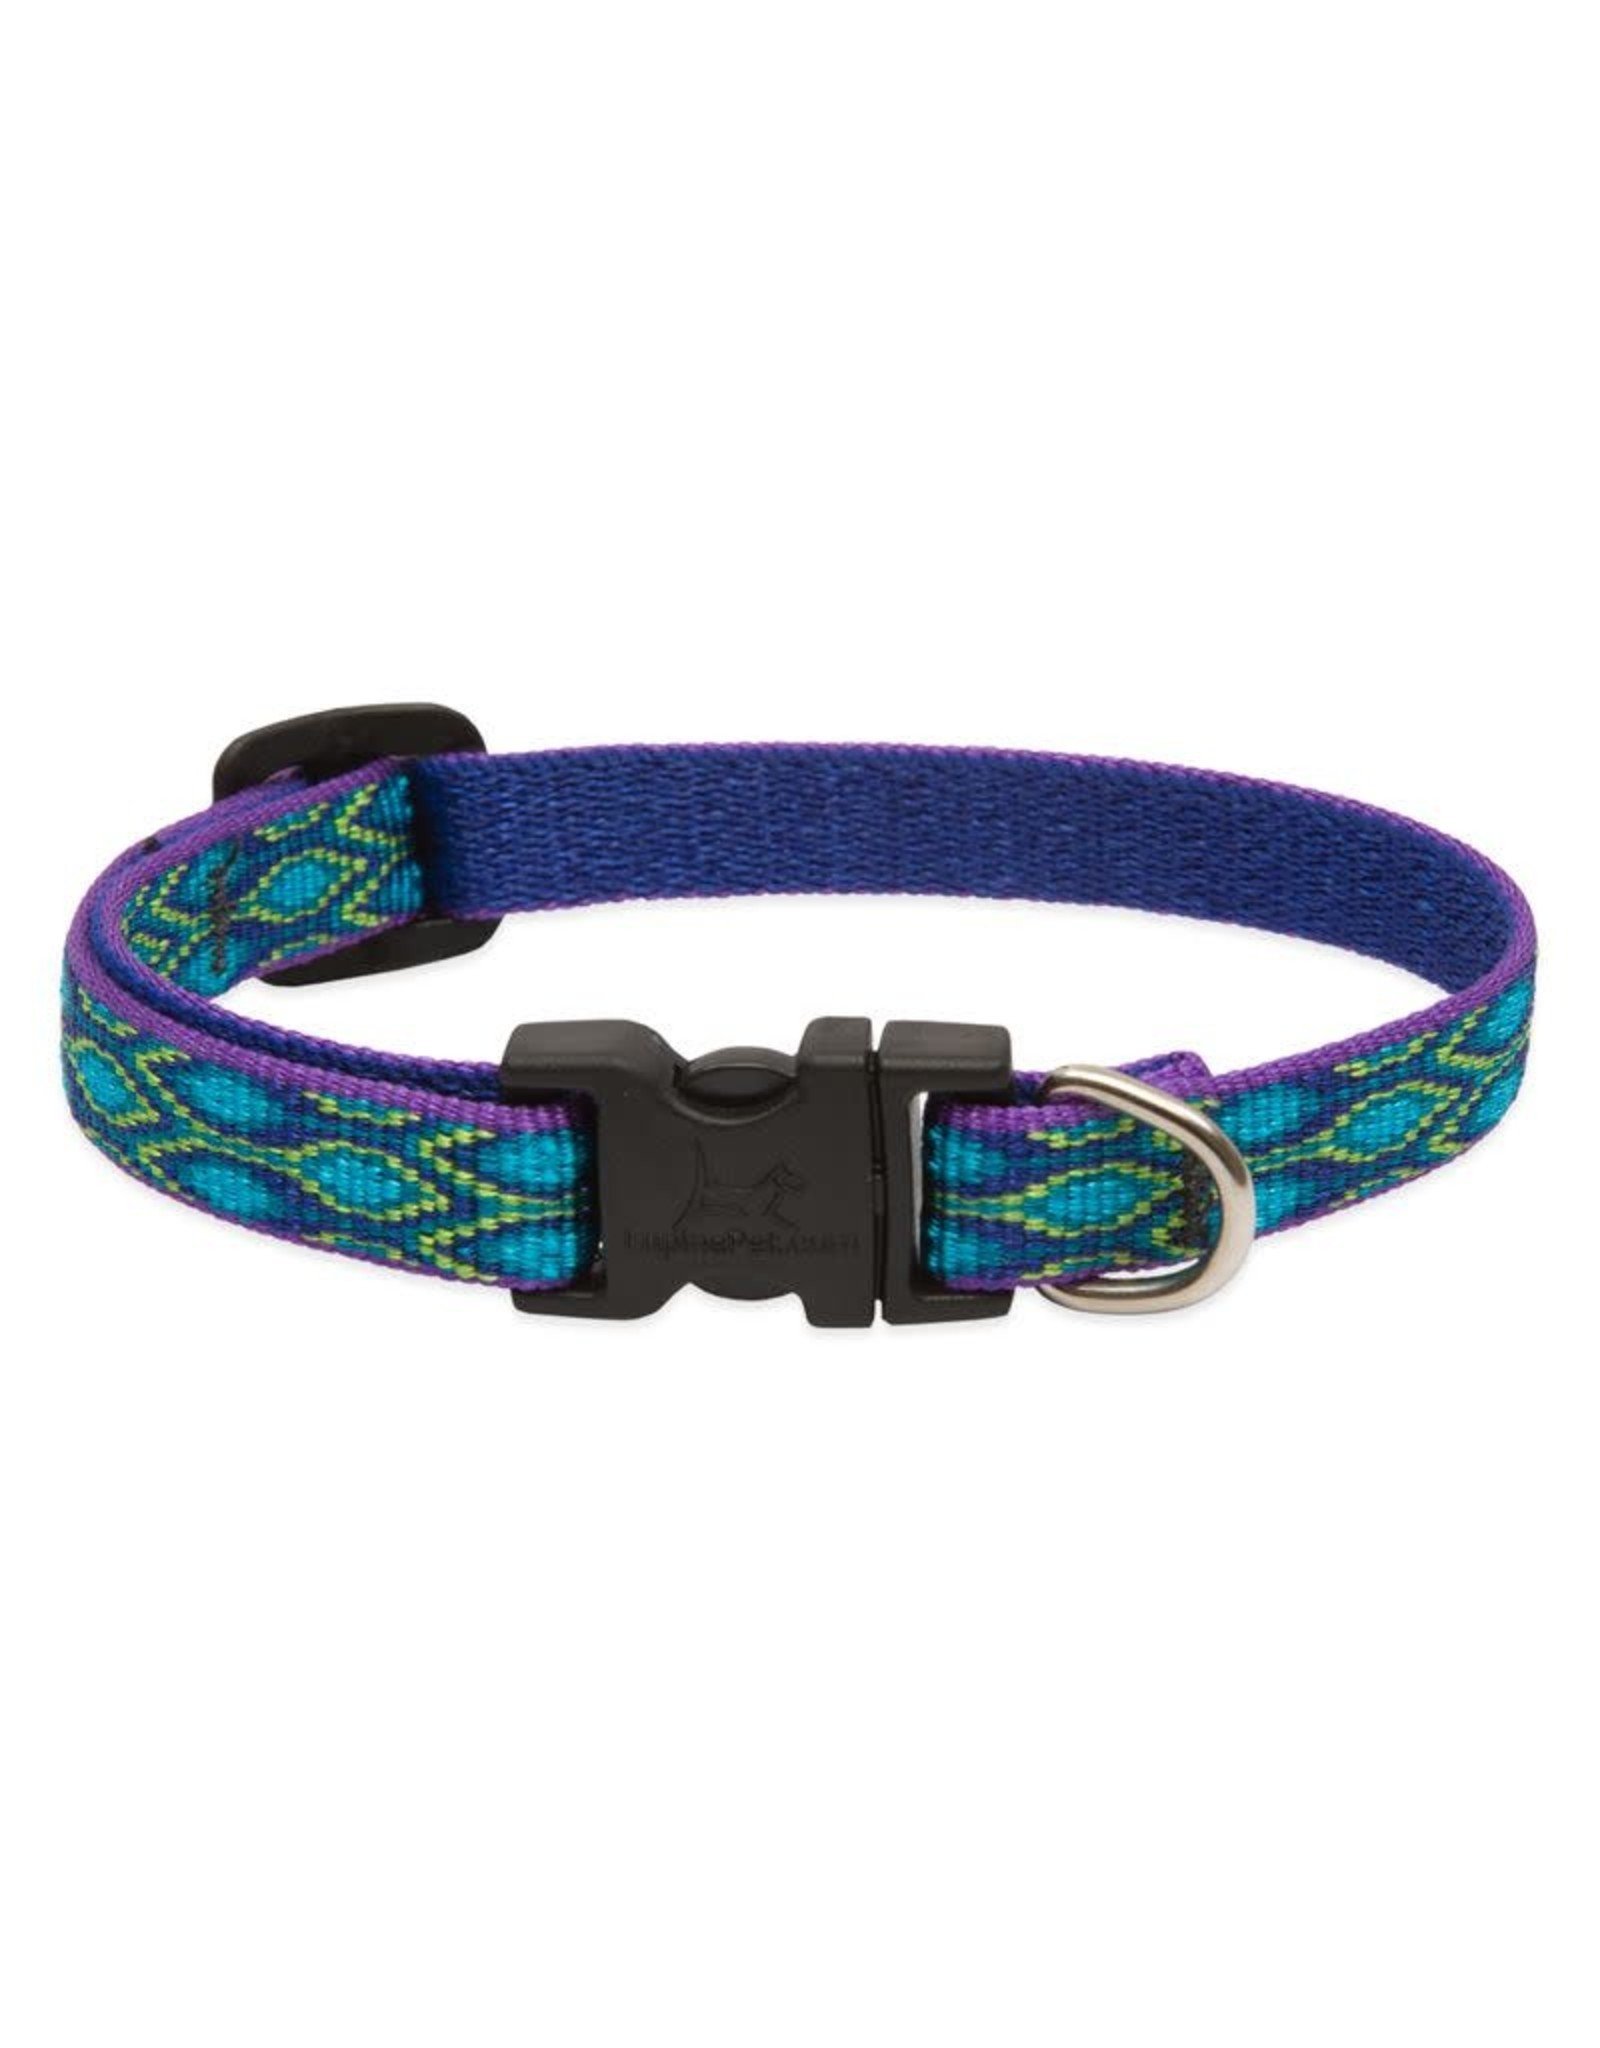 Lupine Lupine Rain Song Collar: 1/2 in wide, 8-12 inch